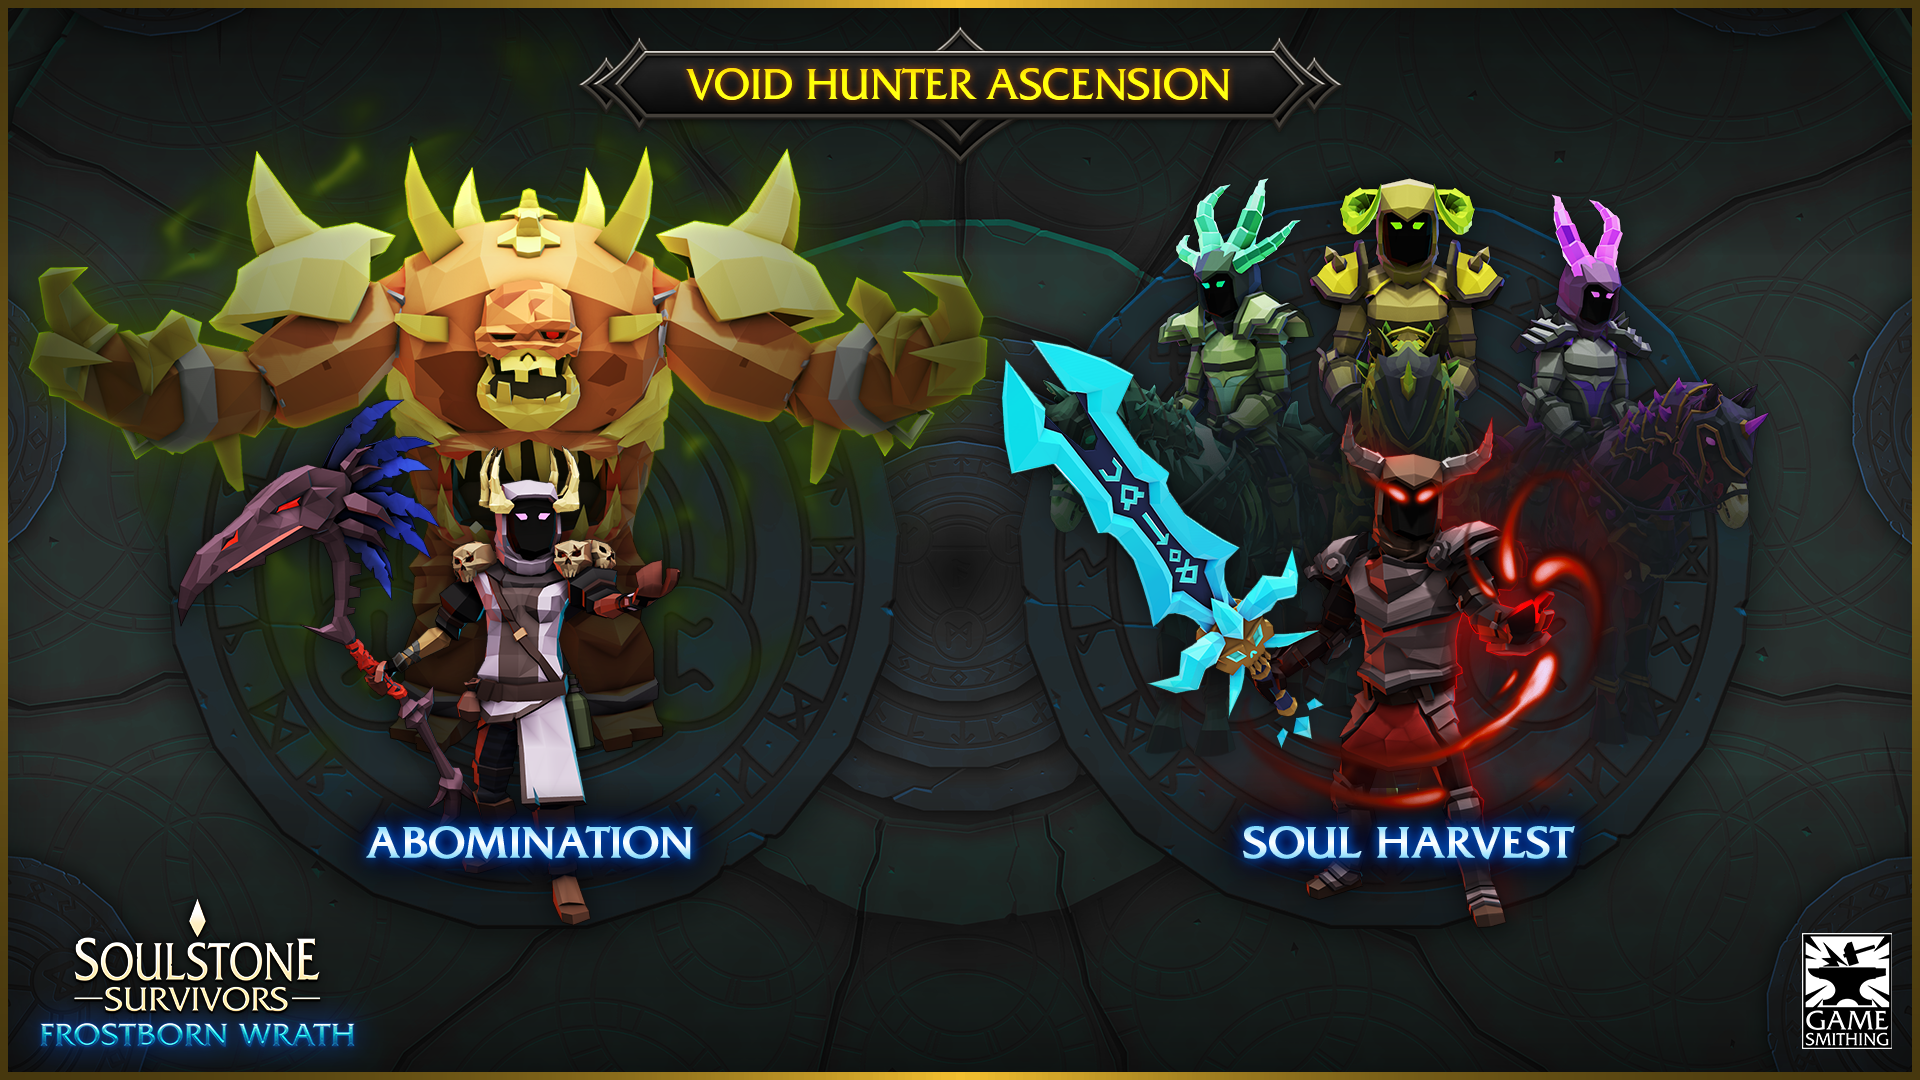 Steam :: Soulstone Survivors :: UPDATE: PATH OF ASCENSION IS LIVE!